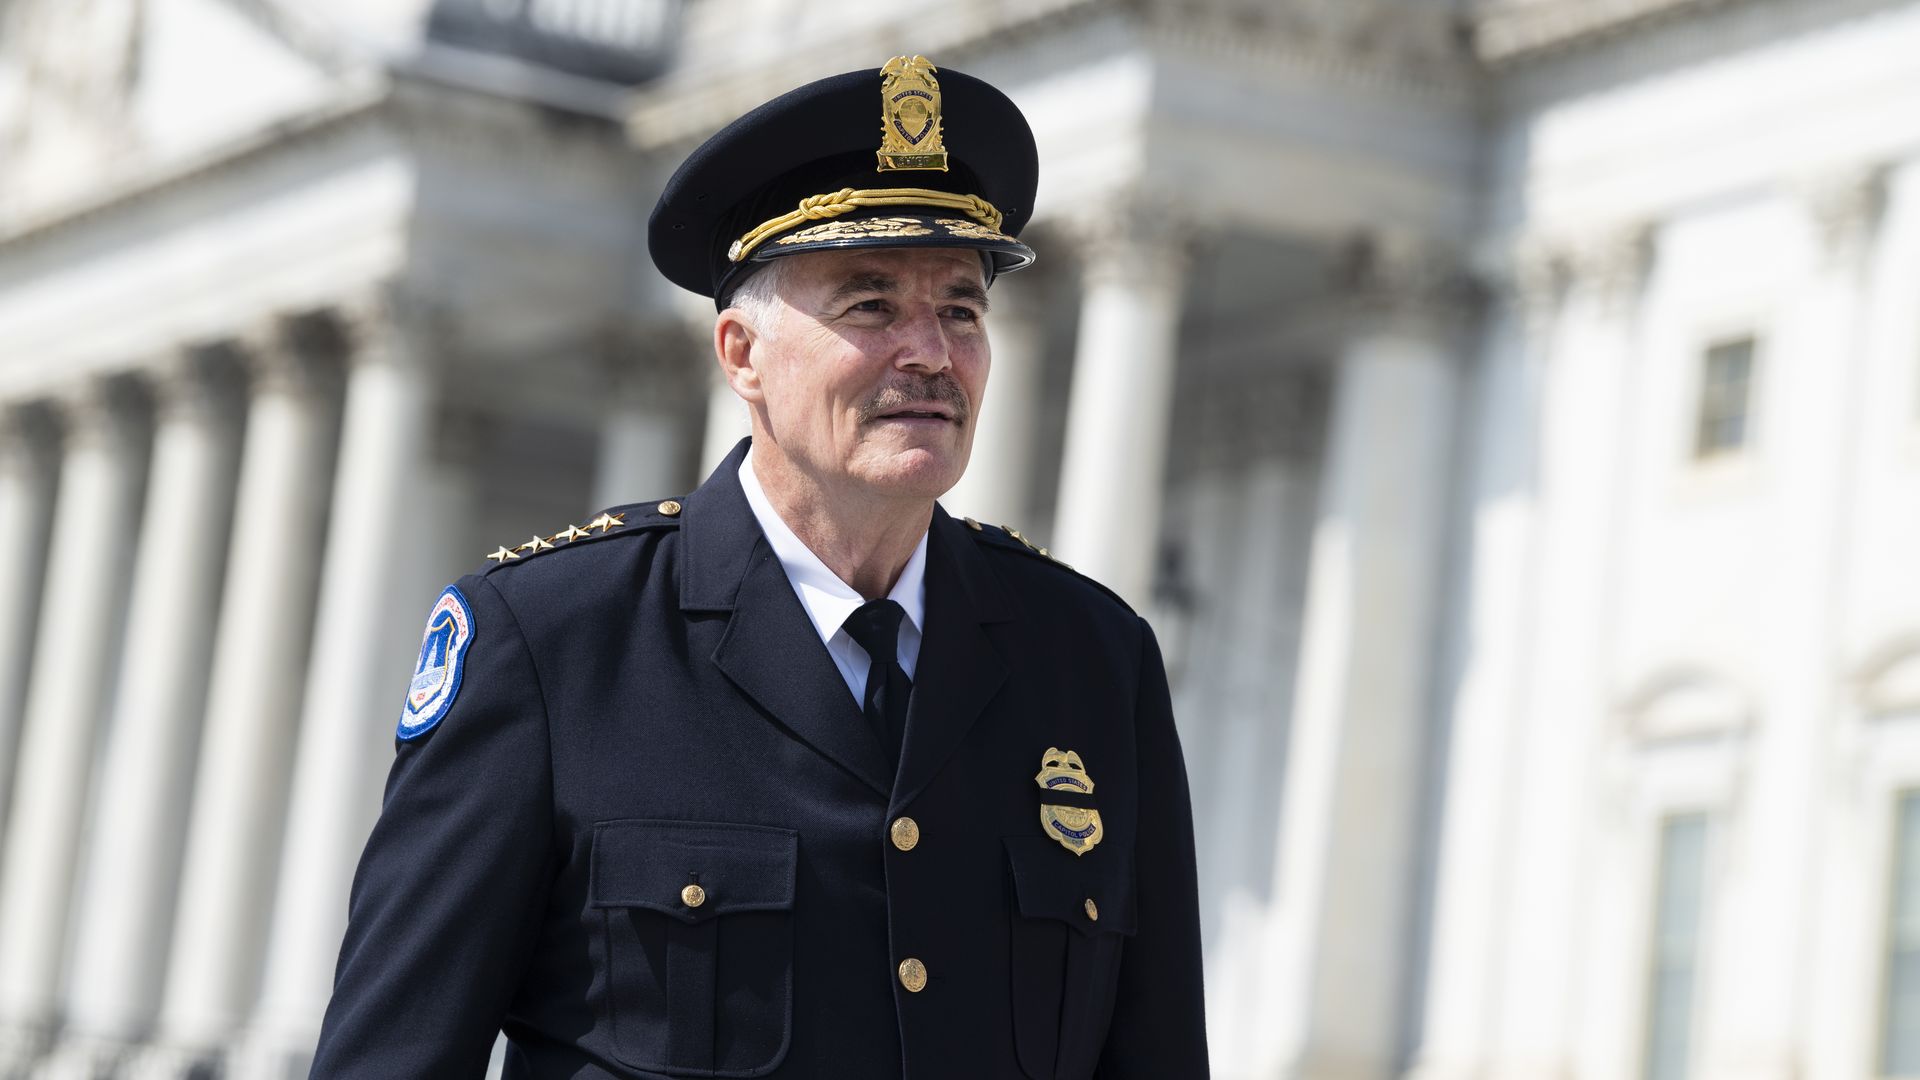 Thomas Manger, the new chief of the U.S. Capitol Police